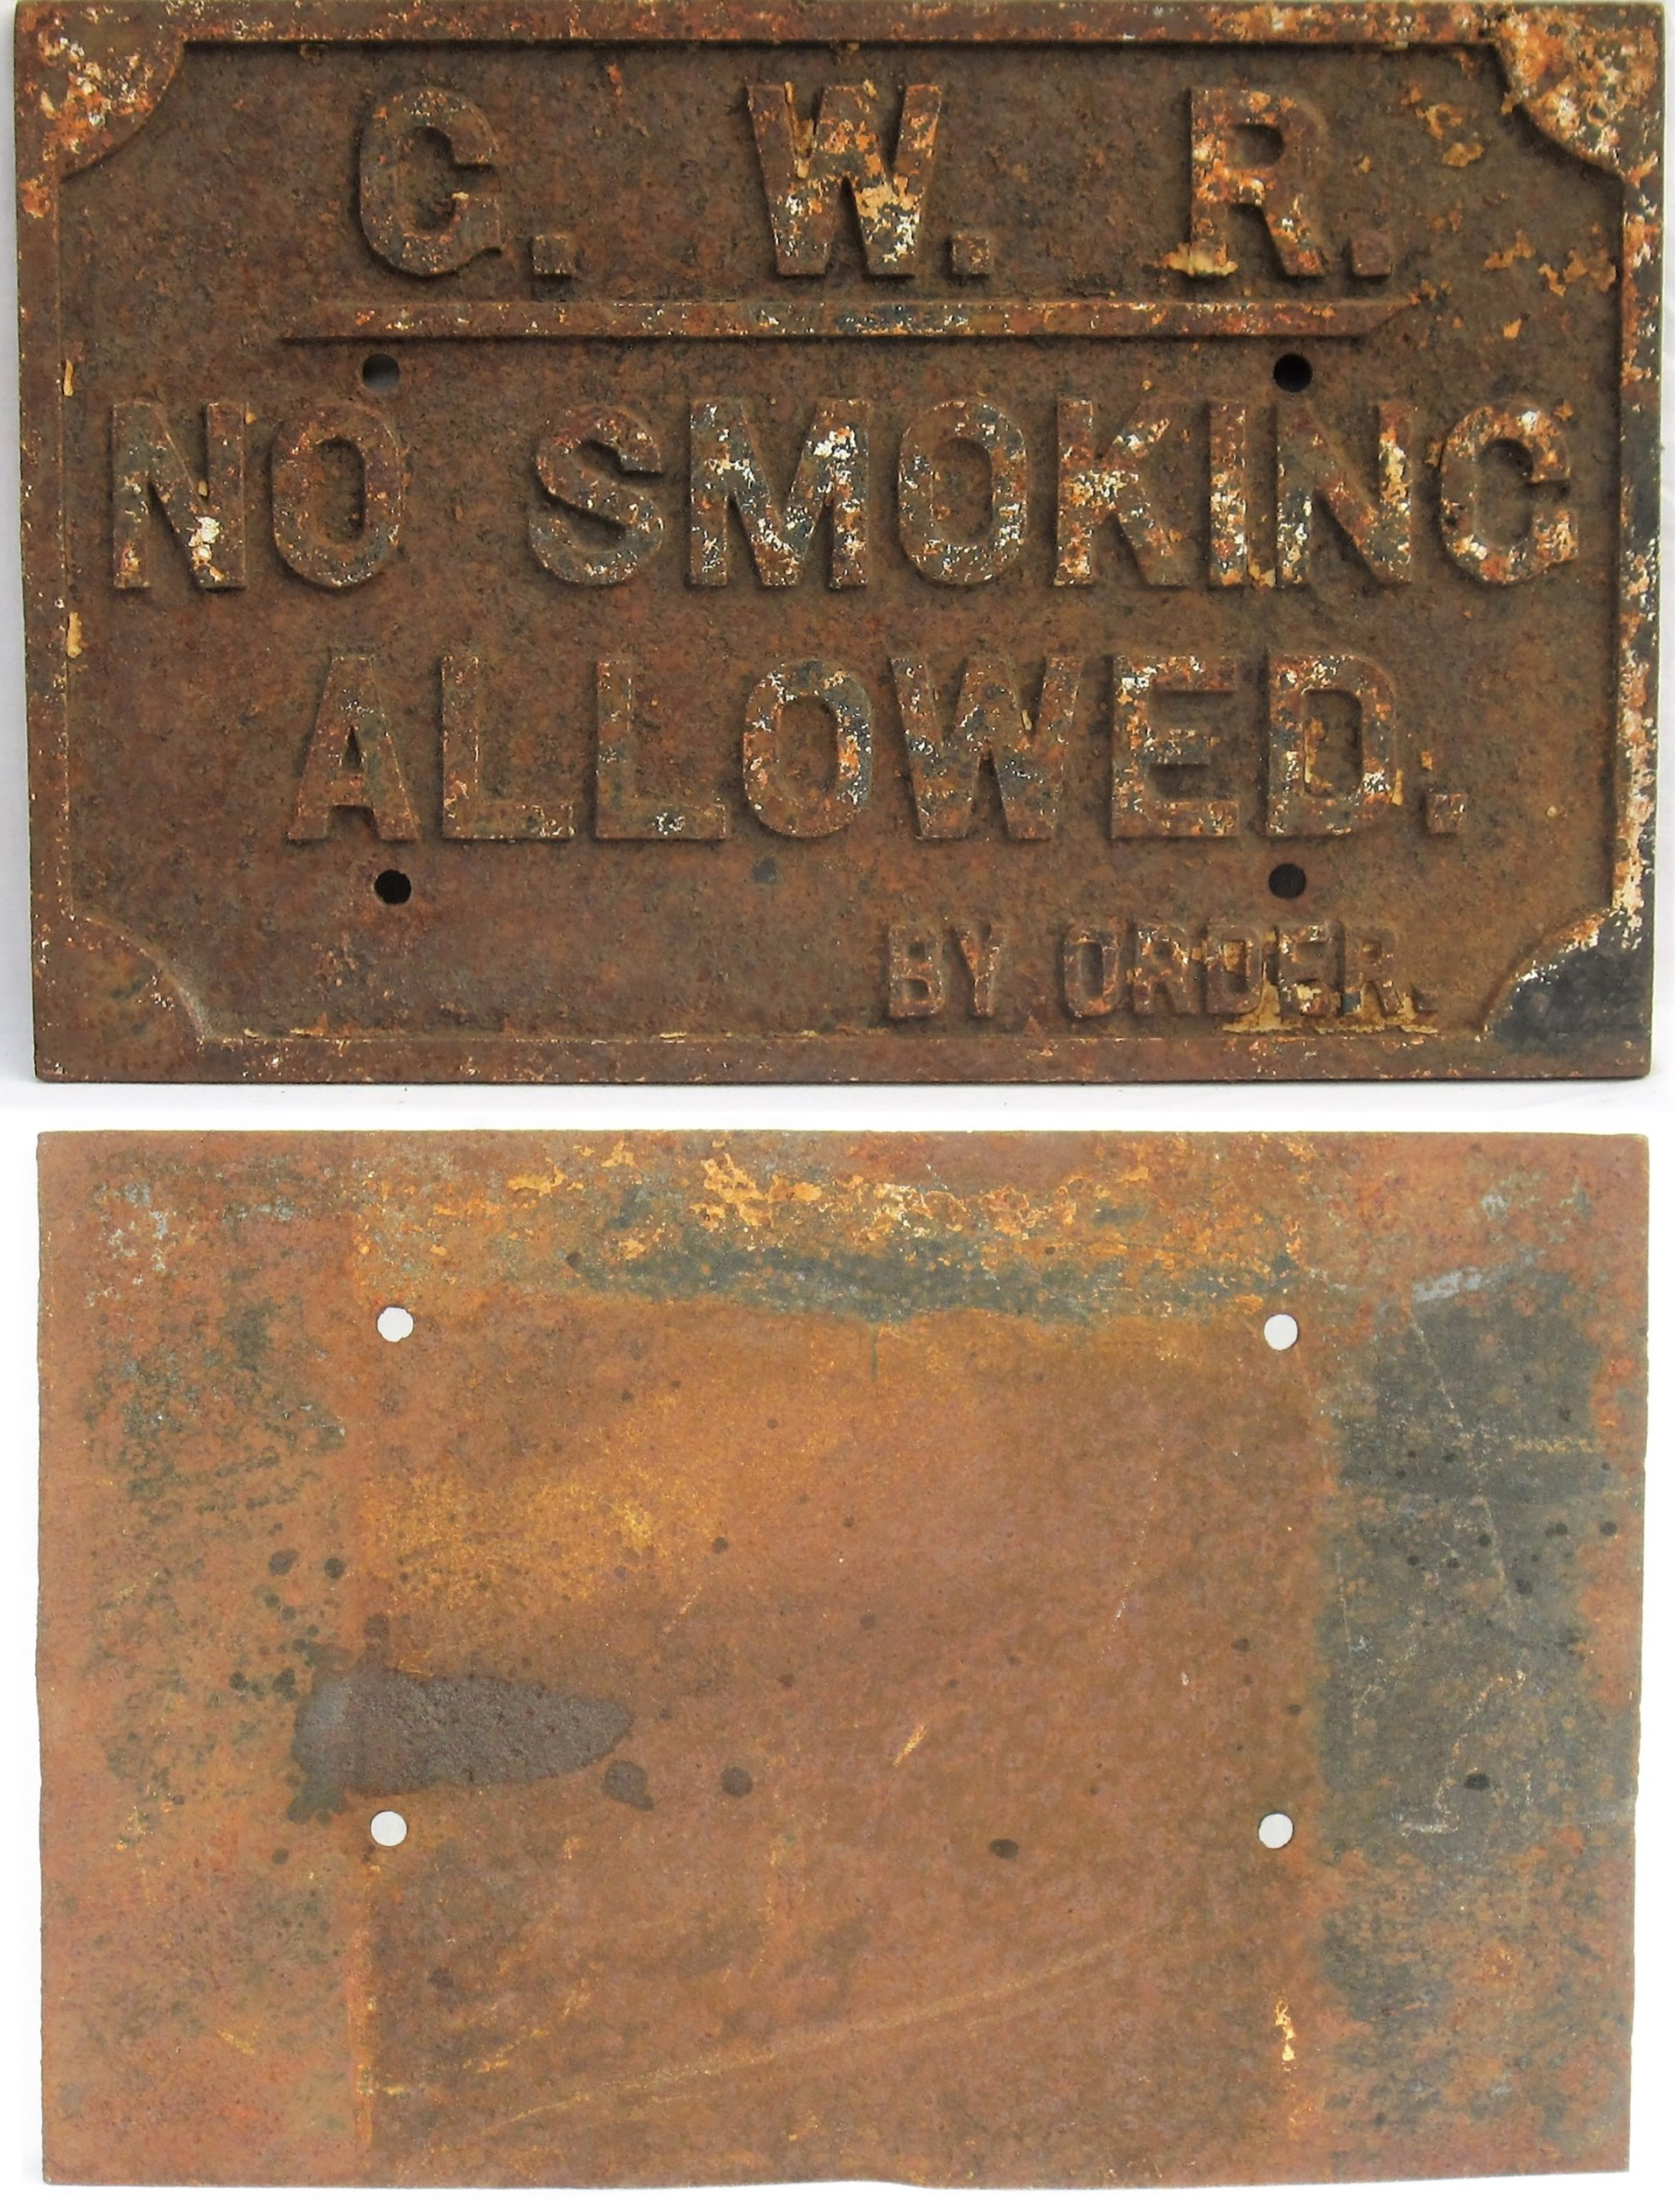 GWR Cast Iron sign. NO SMOKING ALLOWED By Order. Devoid of paint in good original condition.